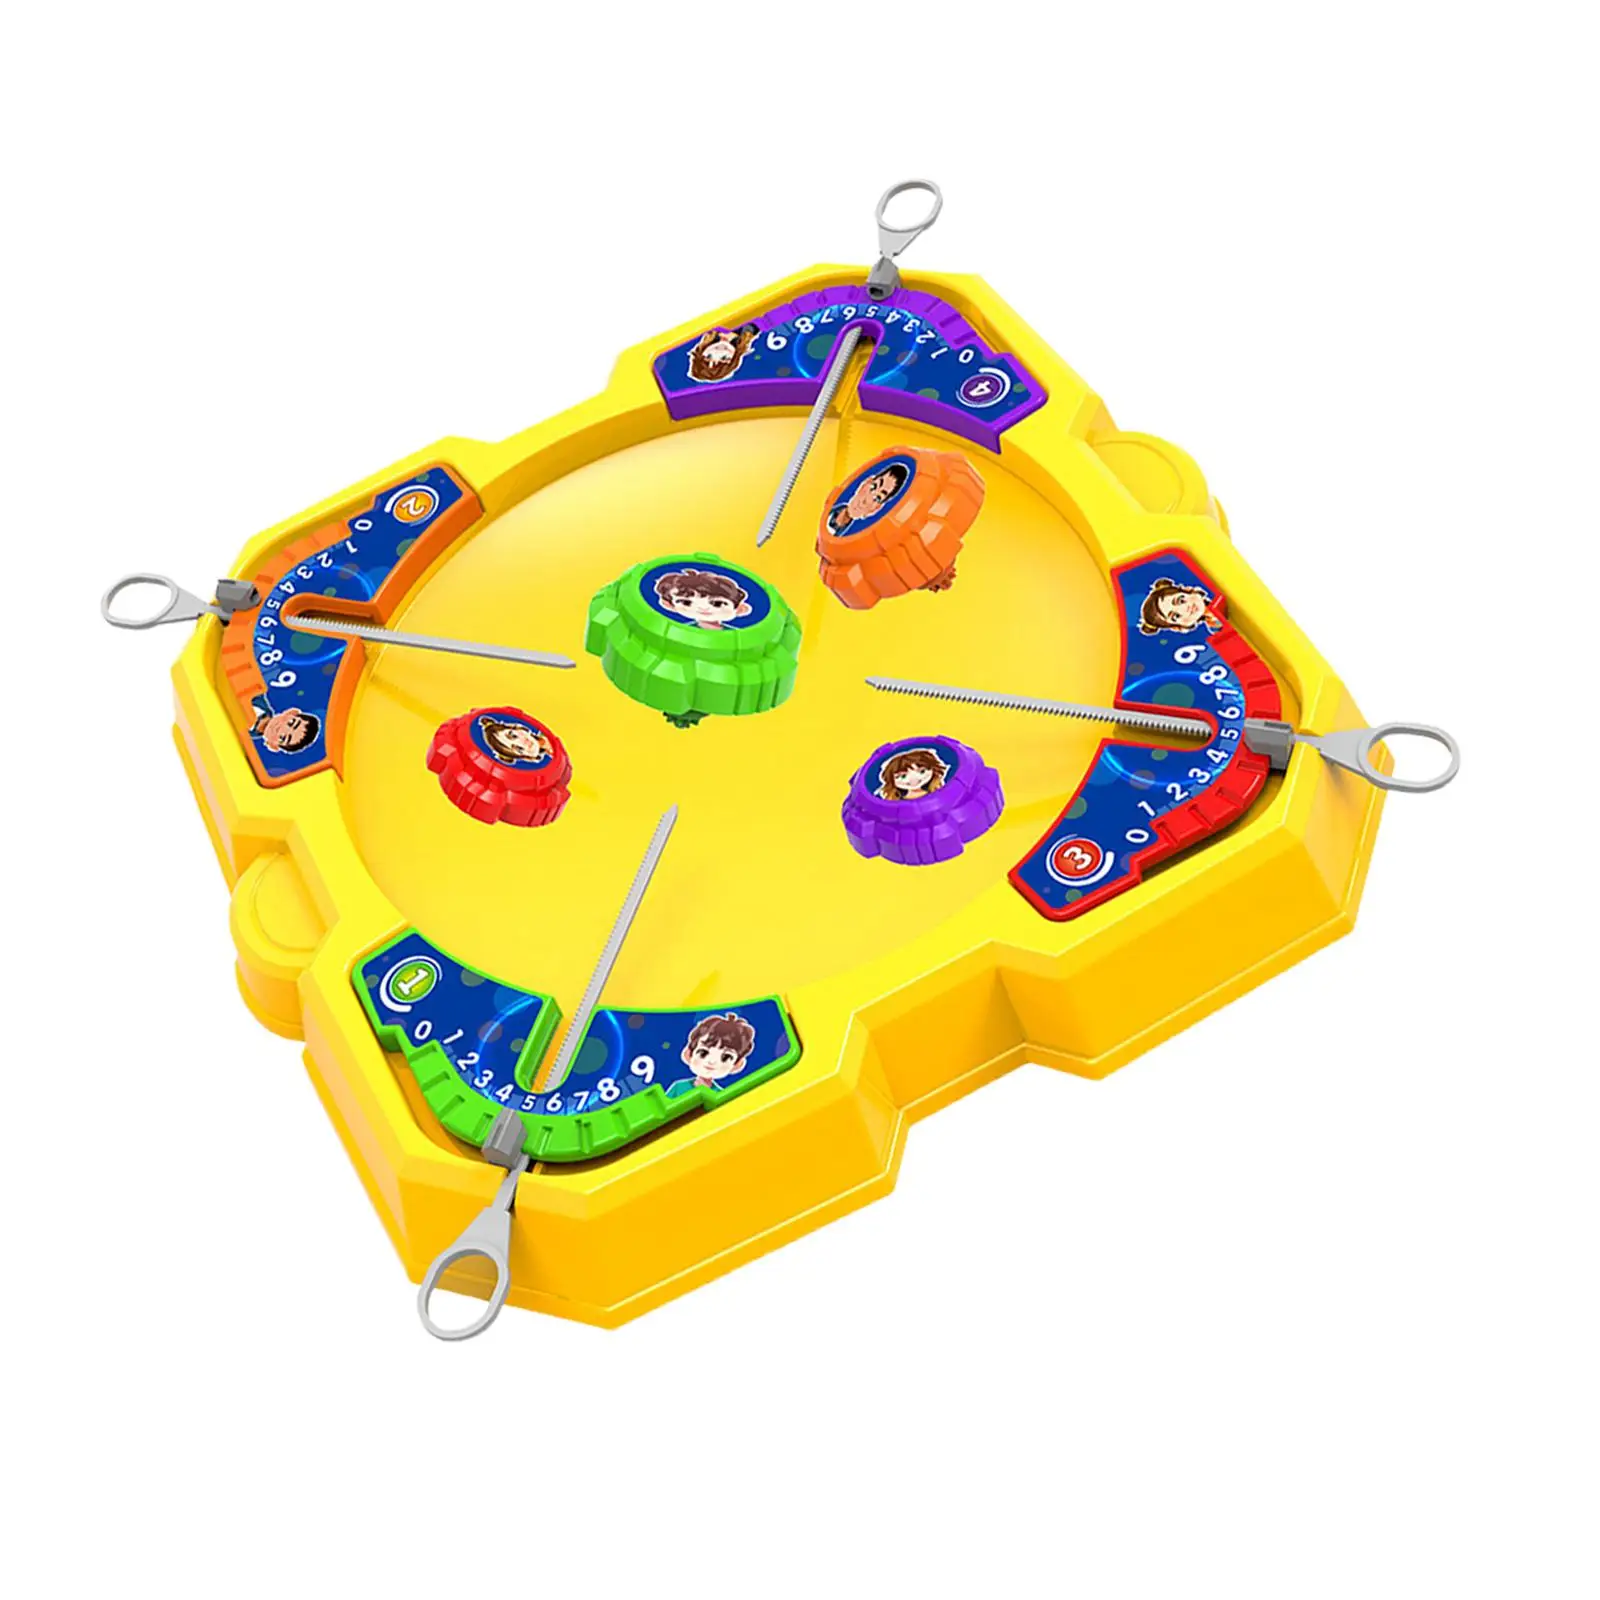 Gyro Playset Foursome Battling Game Gifts for Preschool Parties Desktop